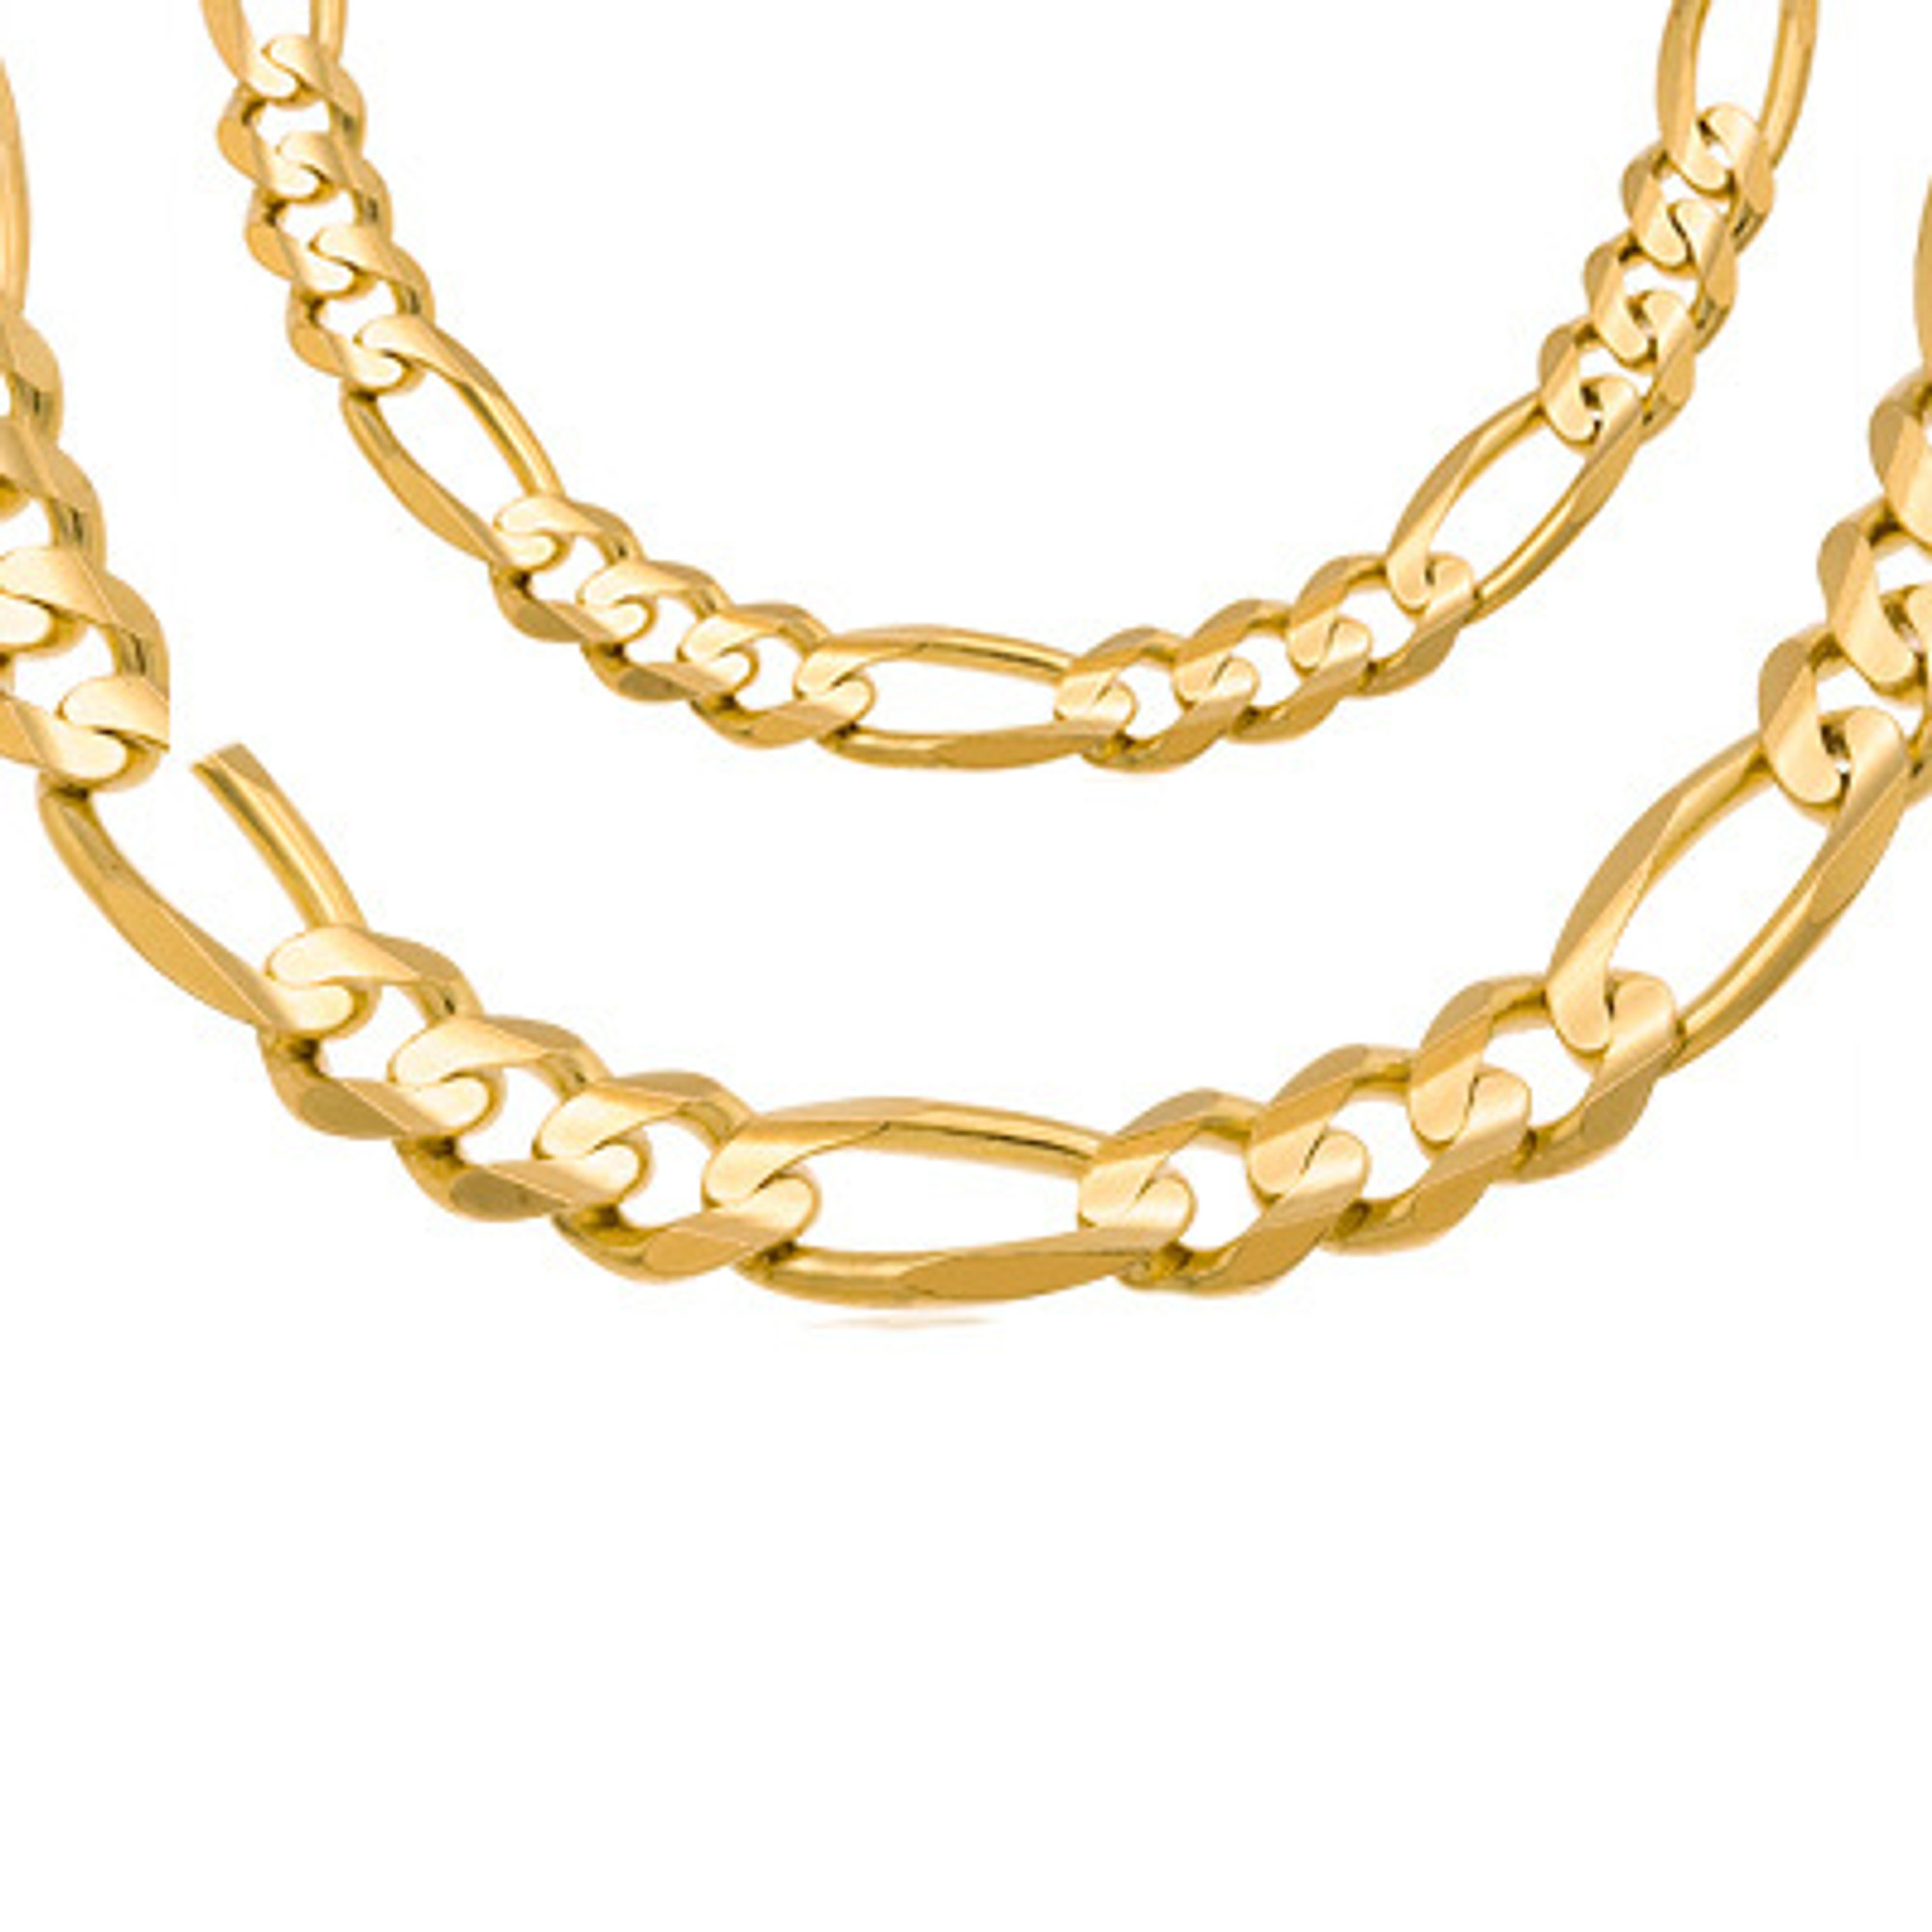 Details about   14K Yellow Gold Light Figaro Chain Bracelet Width 4.6mm Length 7 Inch